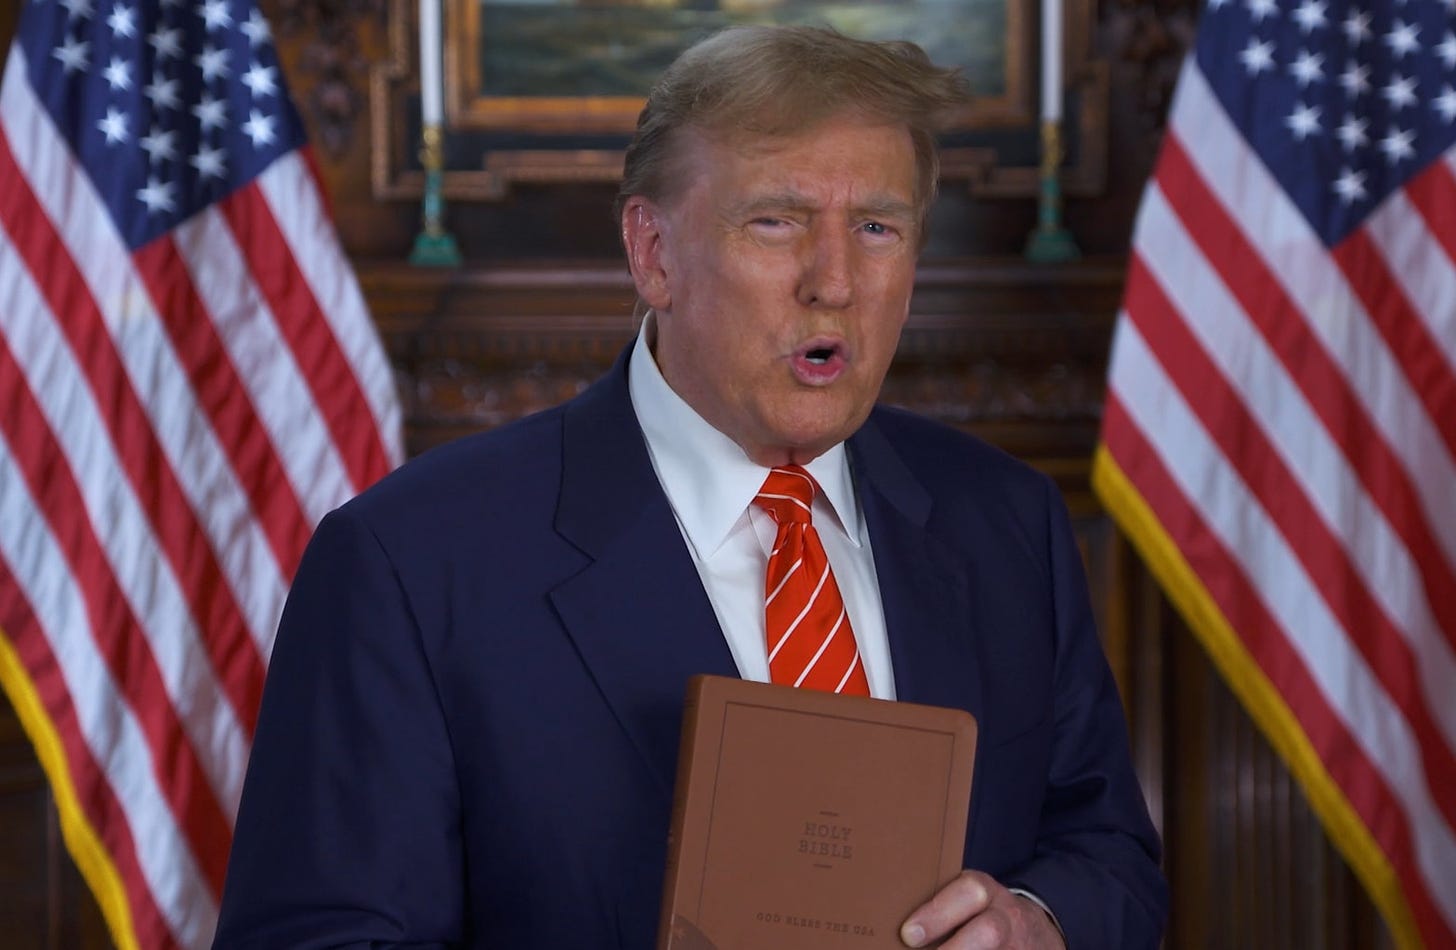 Donald Trump, with flags on both sides of him, holding a brown Bible